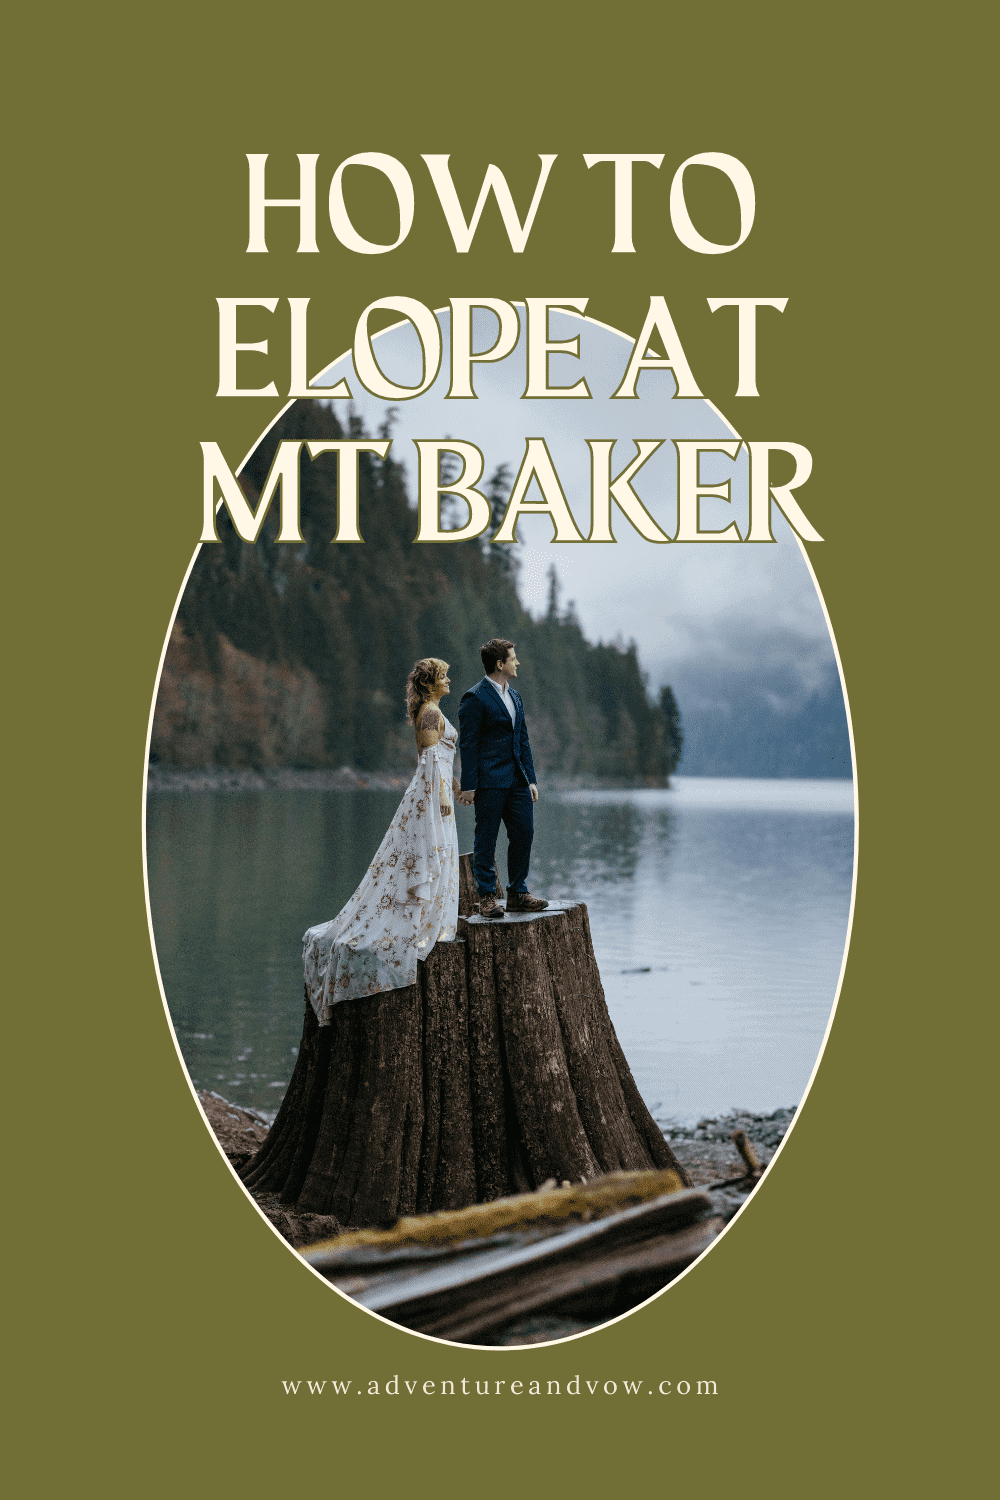 How to Elope at Mt Baker